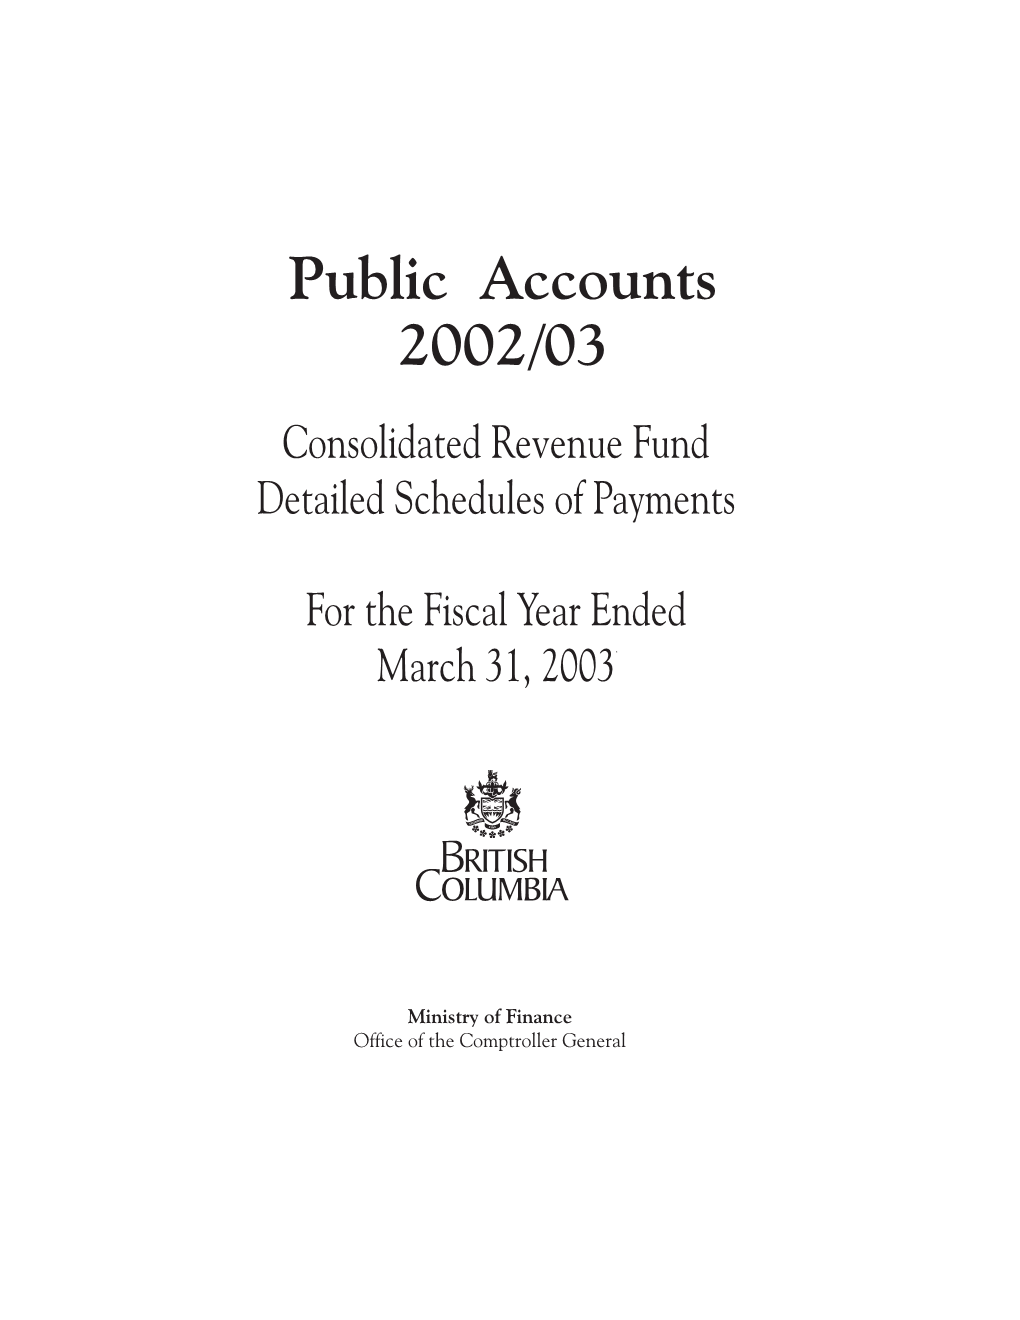 Consolidated Revenue Fund Detailed Schedules of Payments for the Fiscal Year Ended March 31, 2003